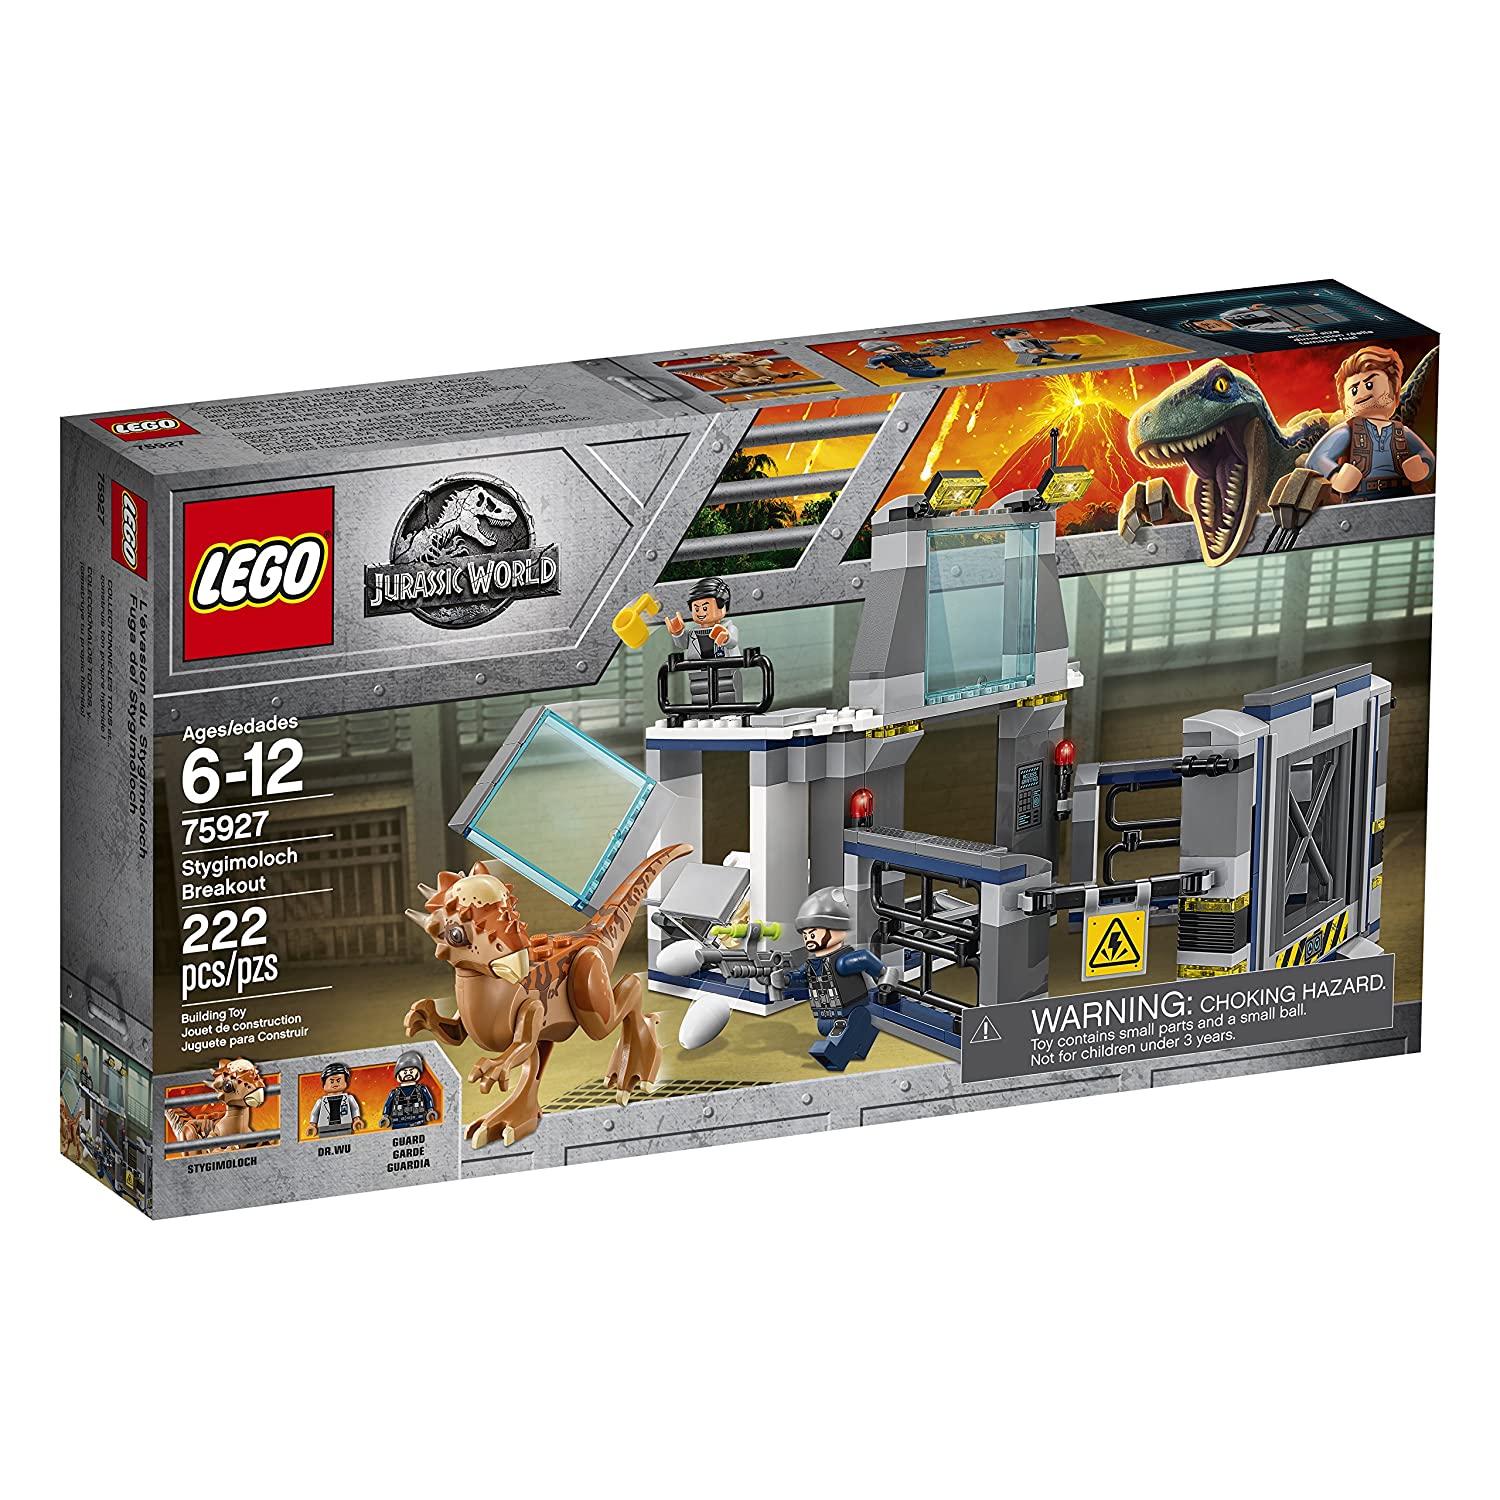 Top 9 Best Lego Jurassic Park Sets Reviews in 2022 9